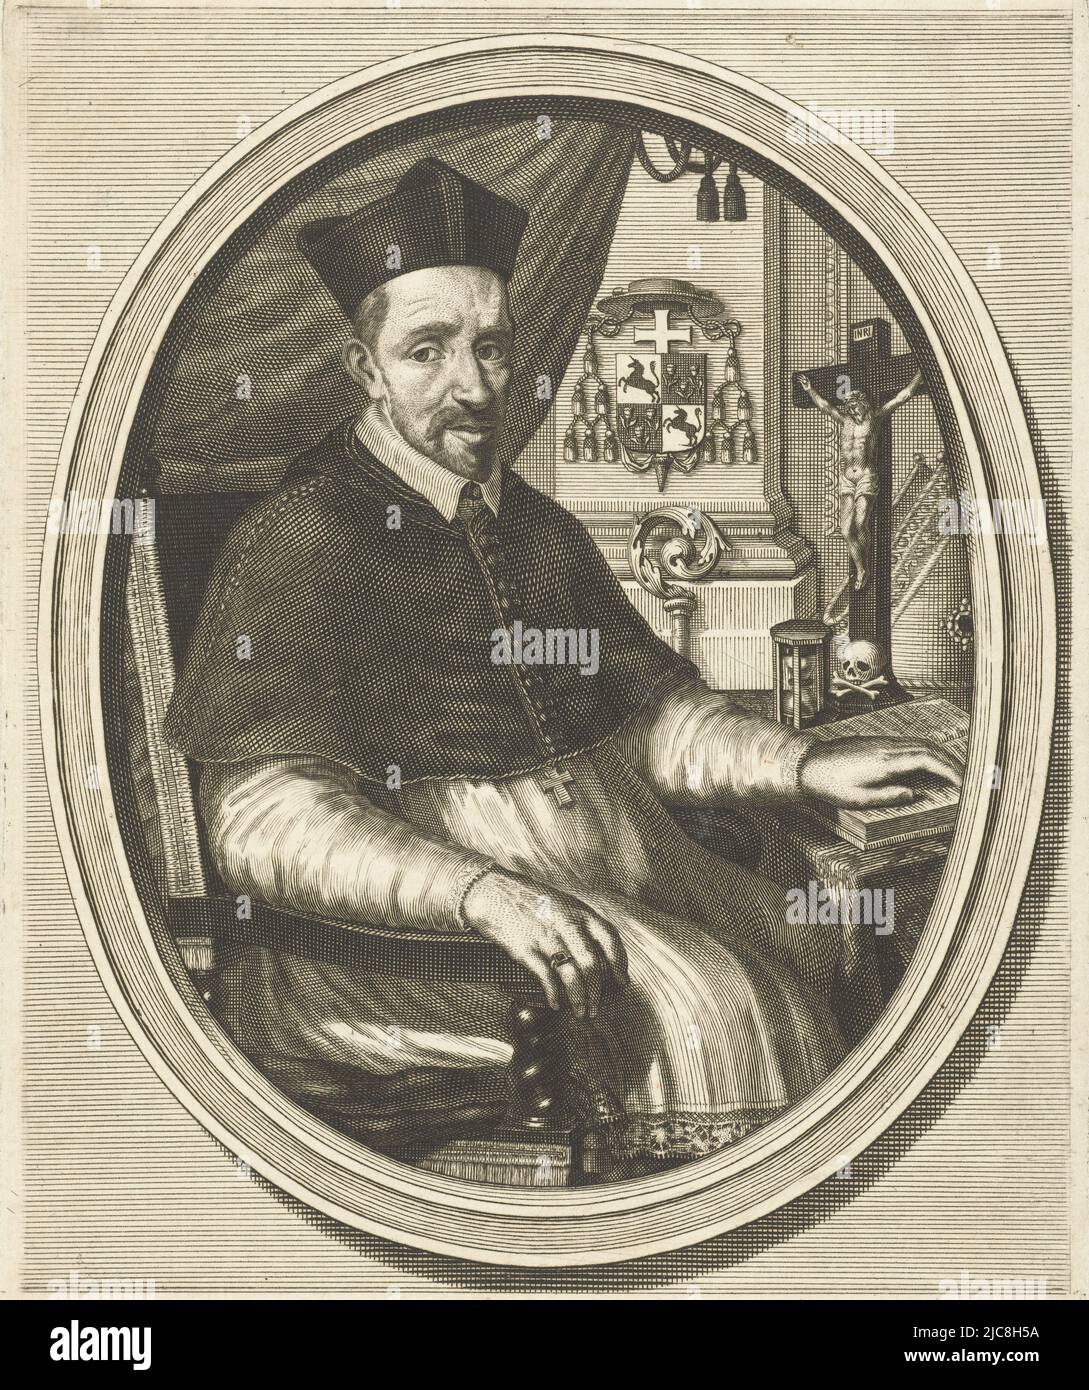 Portrait of Apostolic Vicar Sasbout Vosmaer seated on chair with next to him crucifix and cross staff. His coat of arms is shown on a pilaster. Kneepiece in oval frame, Portrait of Apostolic Vicar Sasbout Vosmaer, print maker: François van Bleyswijck, unknown, Leiden, 1681 - 1726, paper, etching, engraving, h 243 mm × w 157 mm Stock Photo